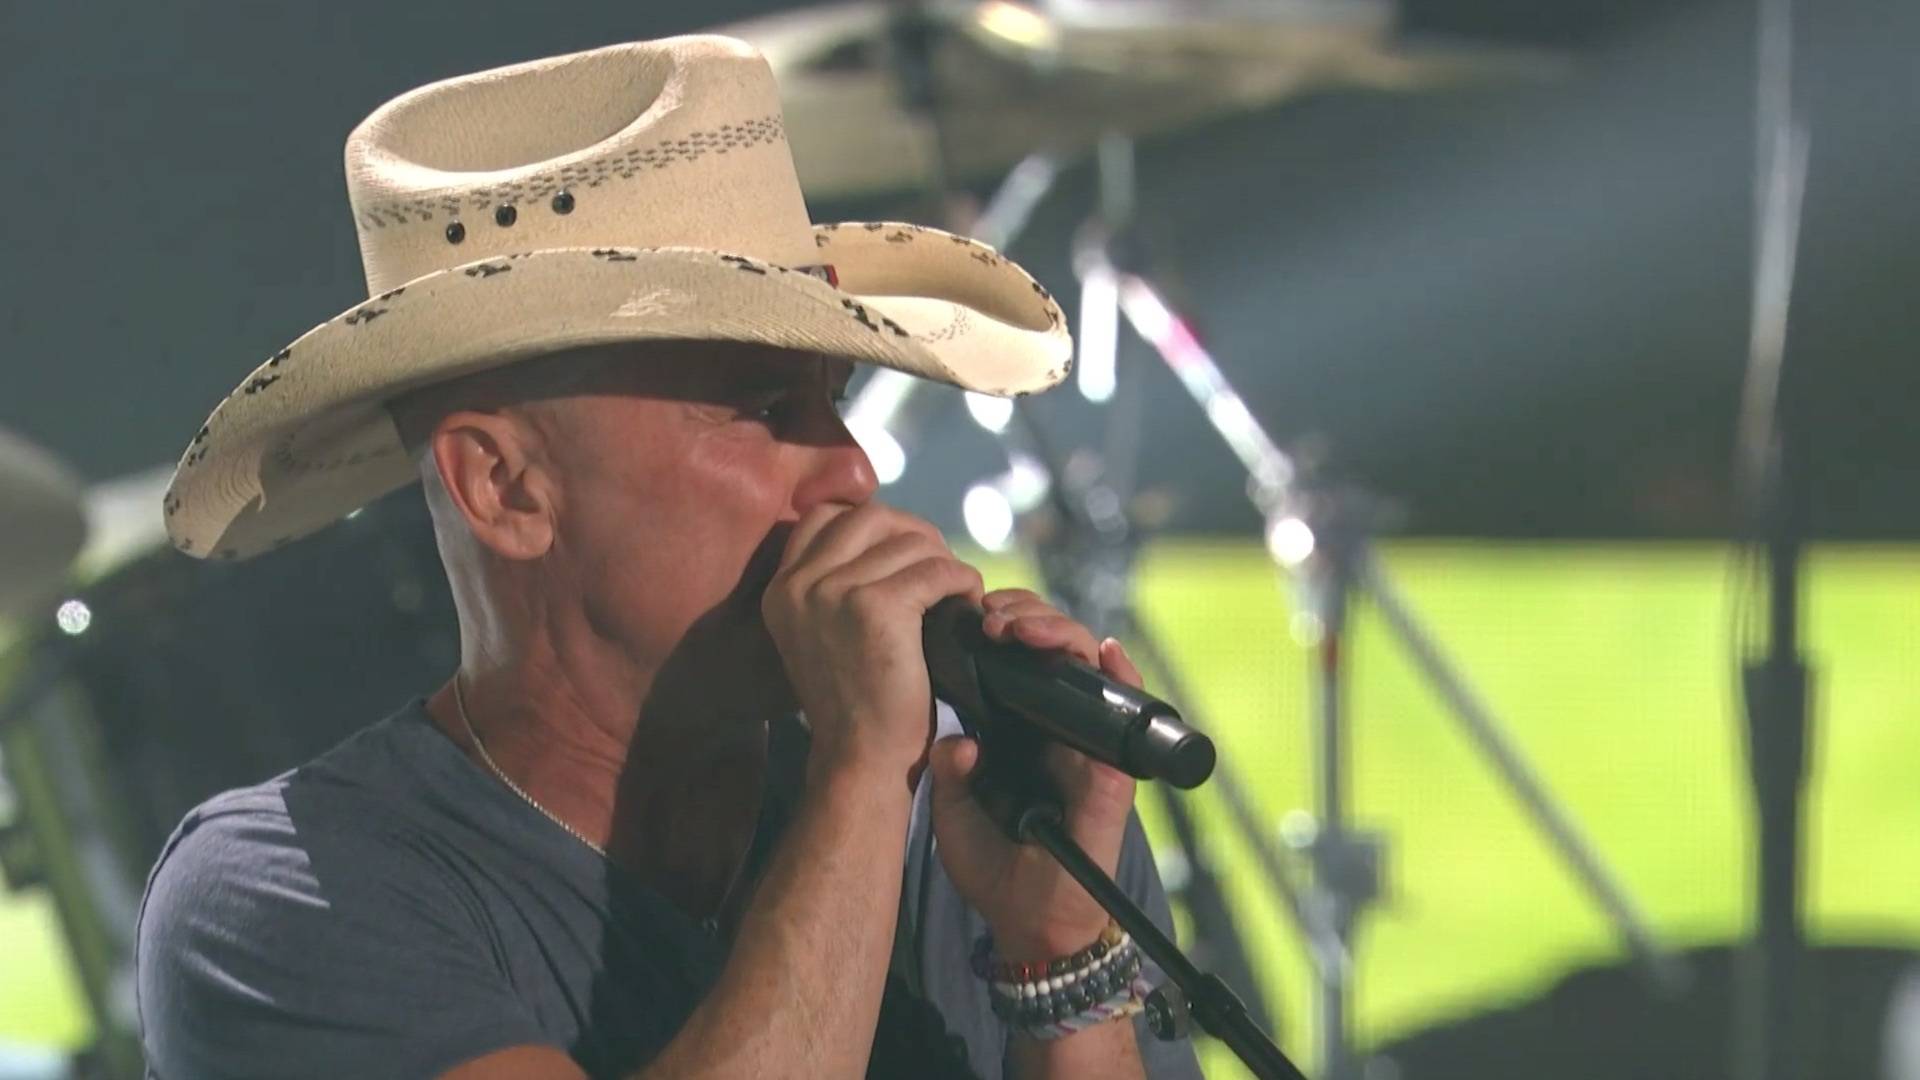 Hitmaker Kenny Chesney closes out the CMT Music Awards 2022 with a performance of his classic song "Beer in Mexico."